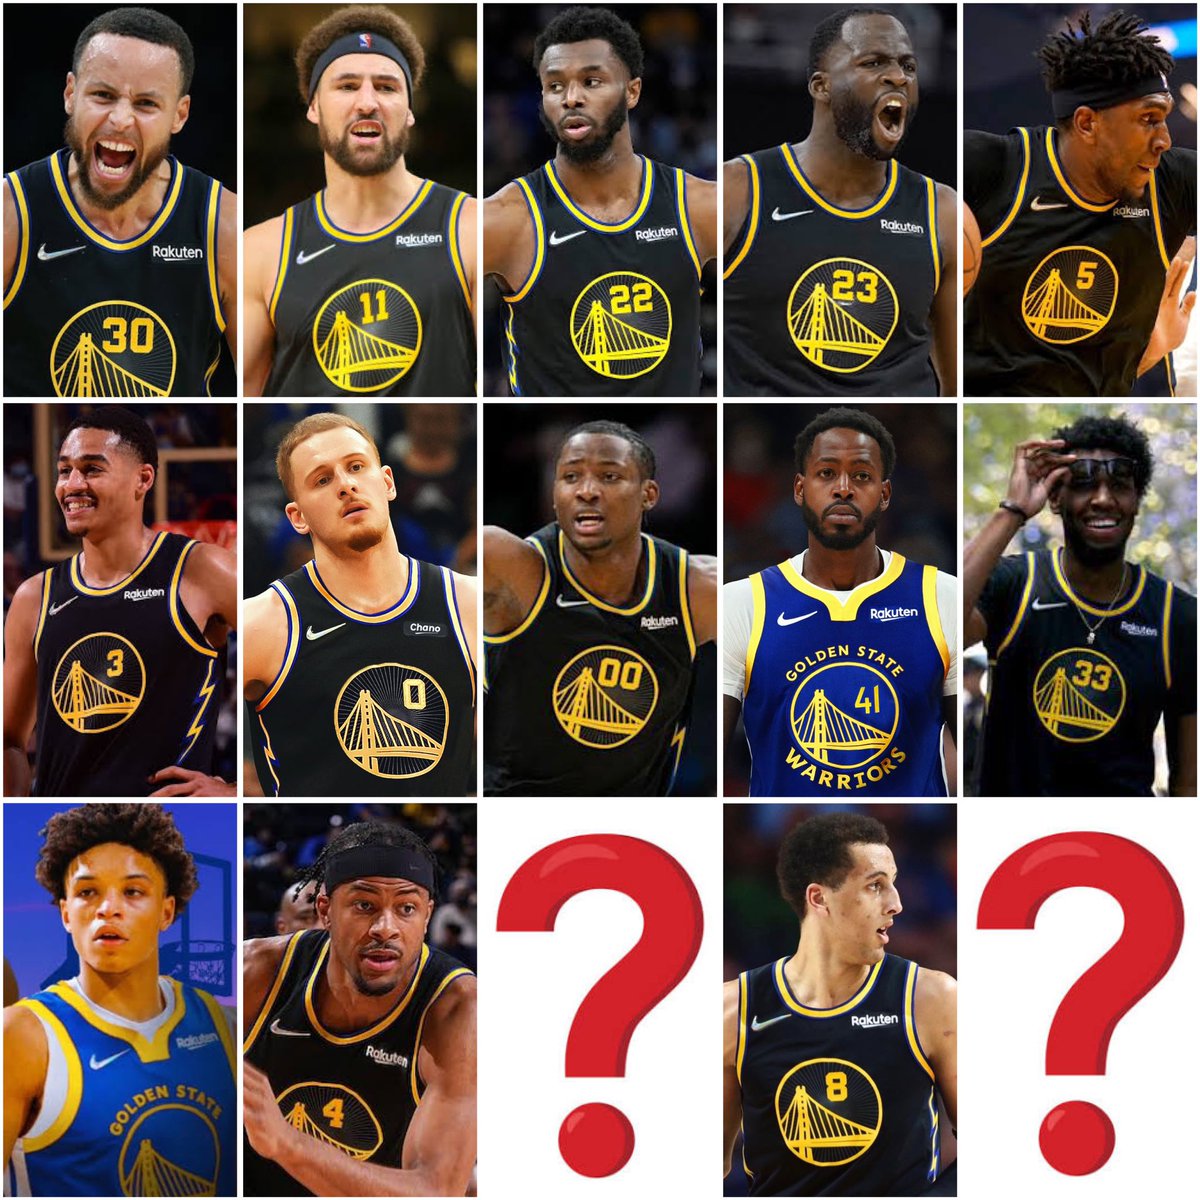 CURRENT SQUAD!!

🔥
🔥
🔥

#DubNation #GoldBlooded #Warriors